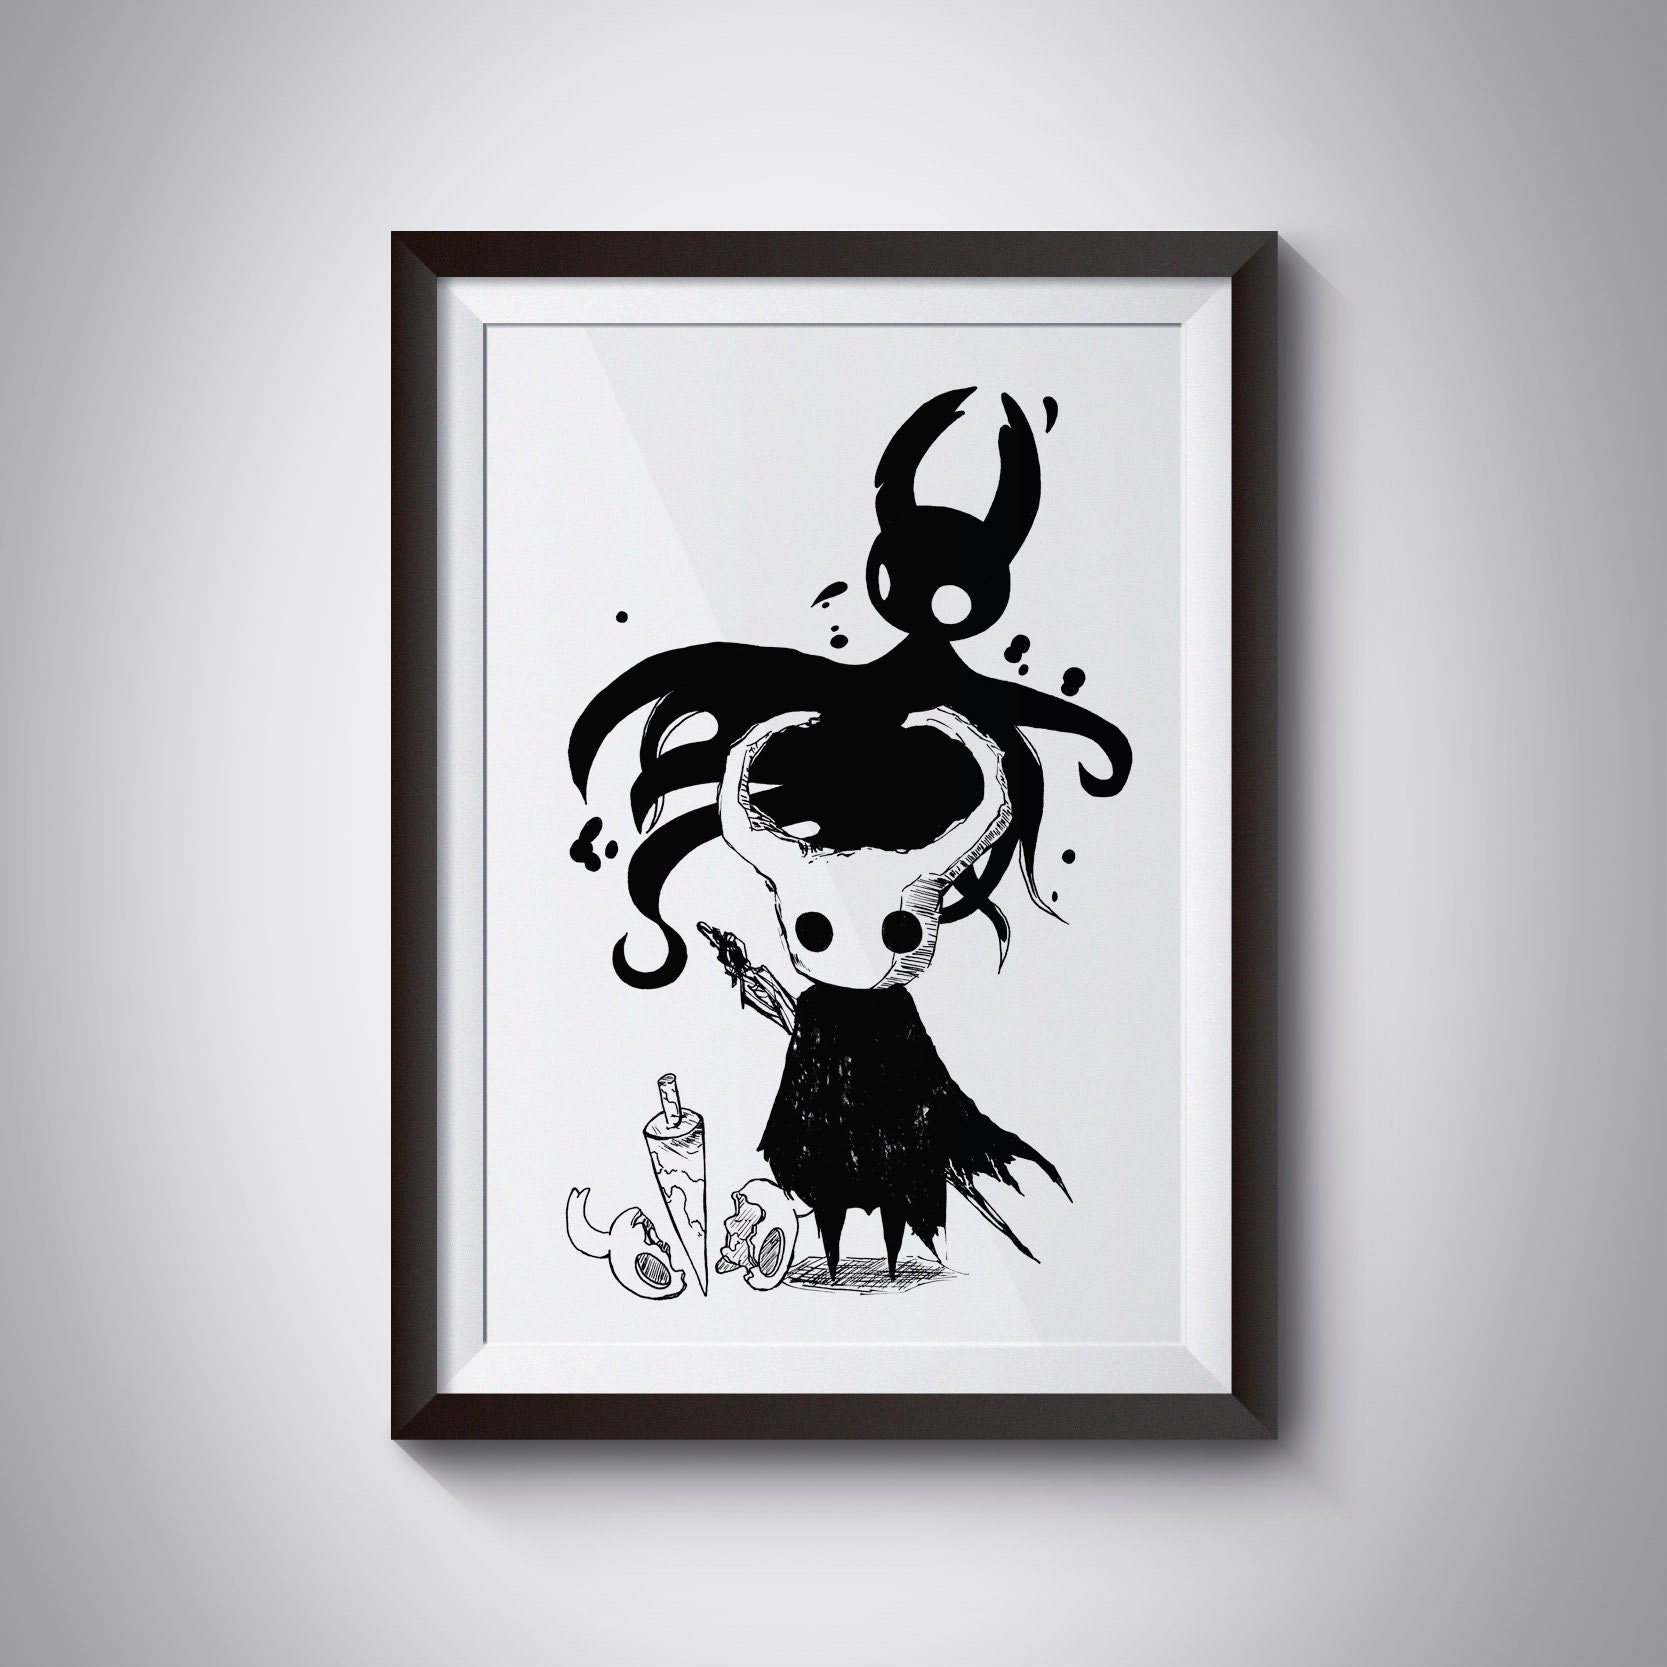 HOLLOW SHADE & SHELL Hollow Knight Video Game Illustration | Etsy